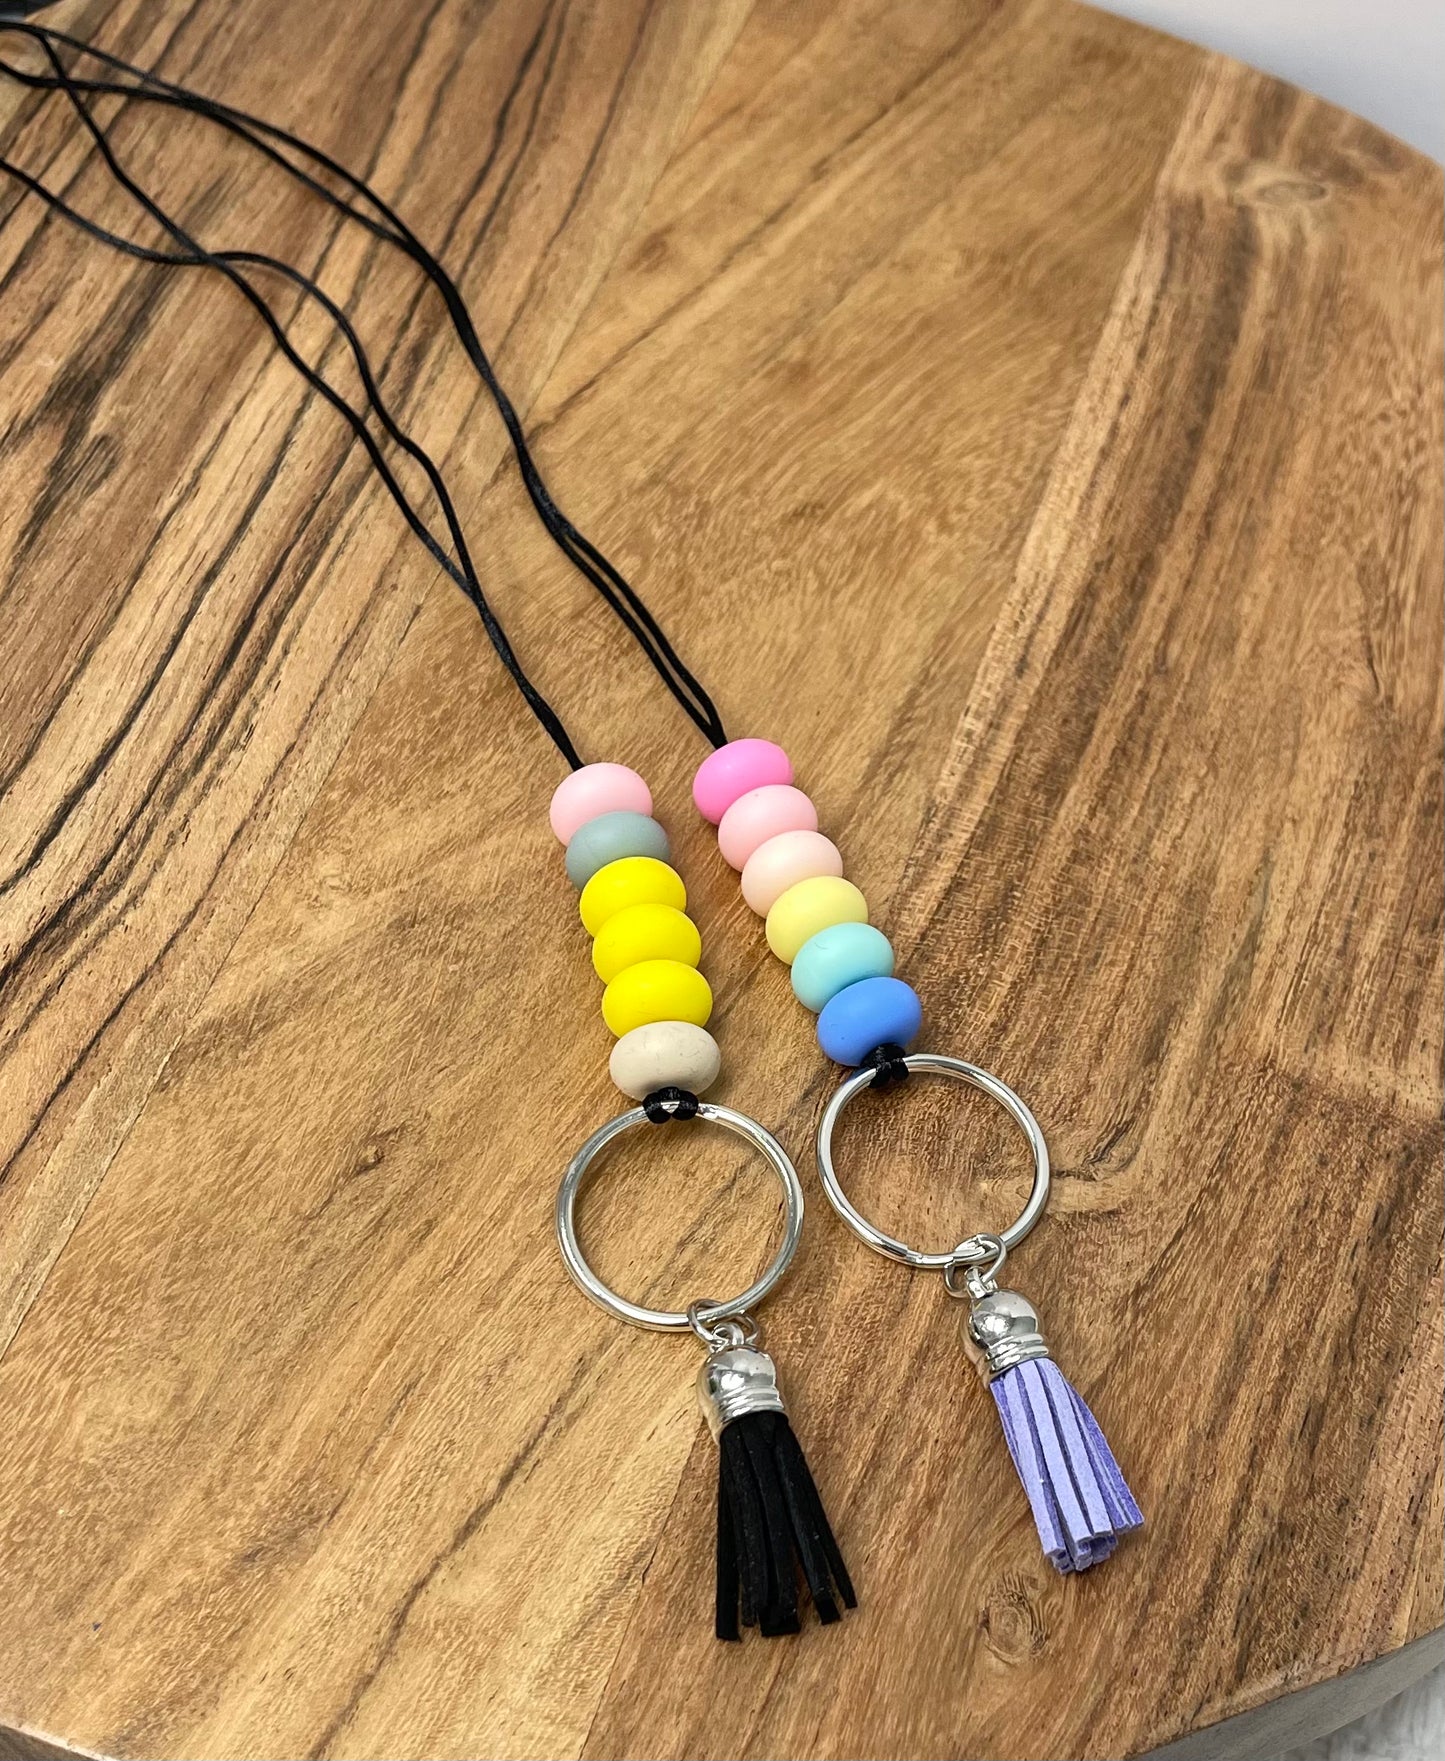 Tassel Lanyard with Silicone Beads